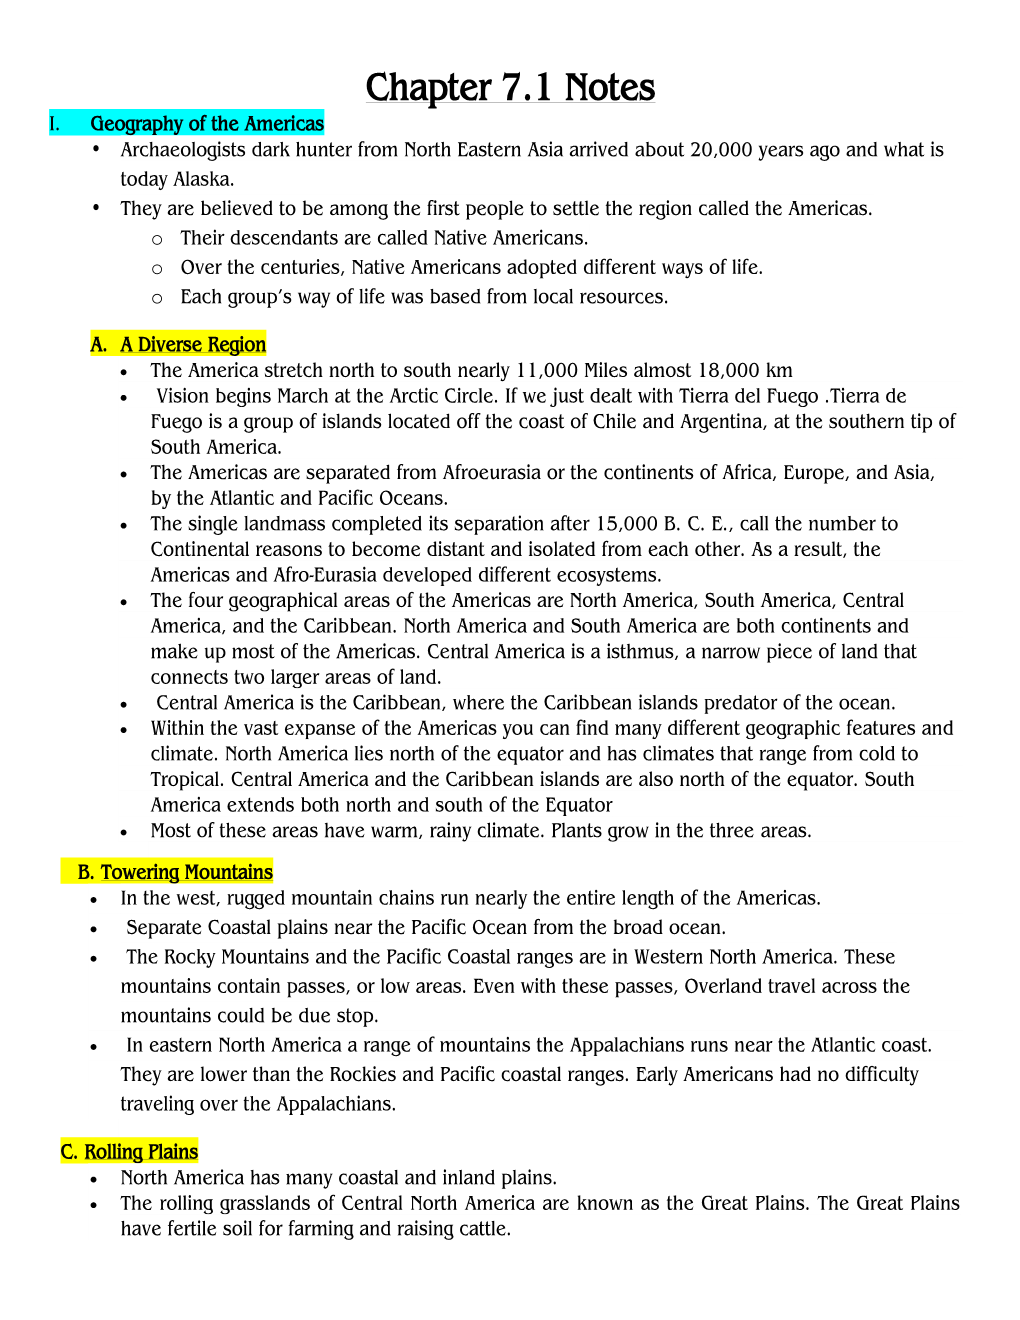 Chapter 7.1 Notes I